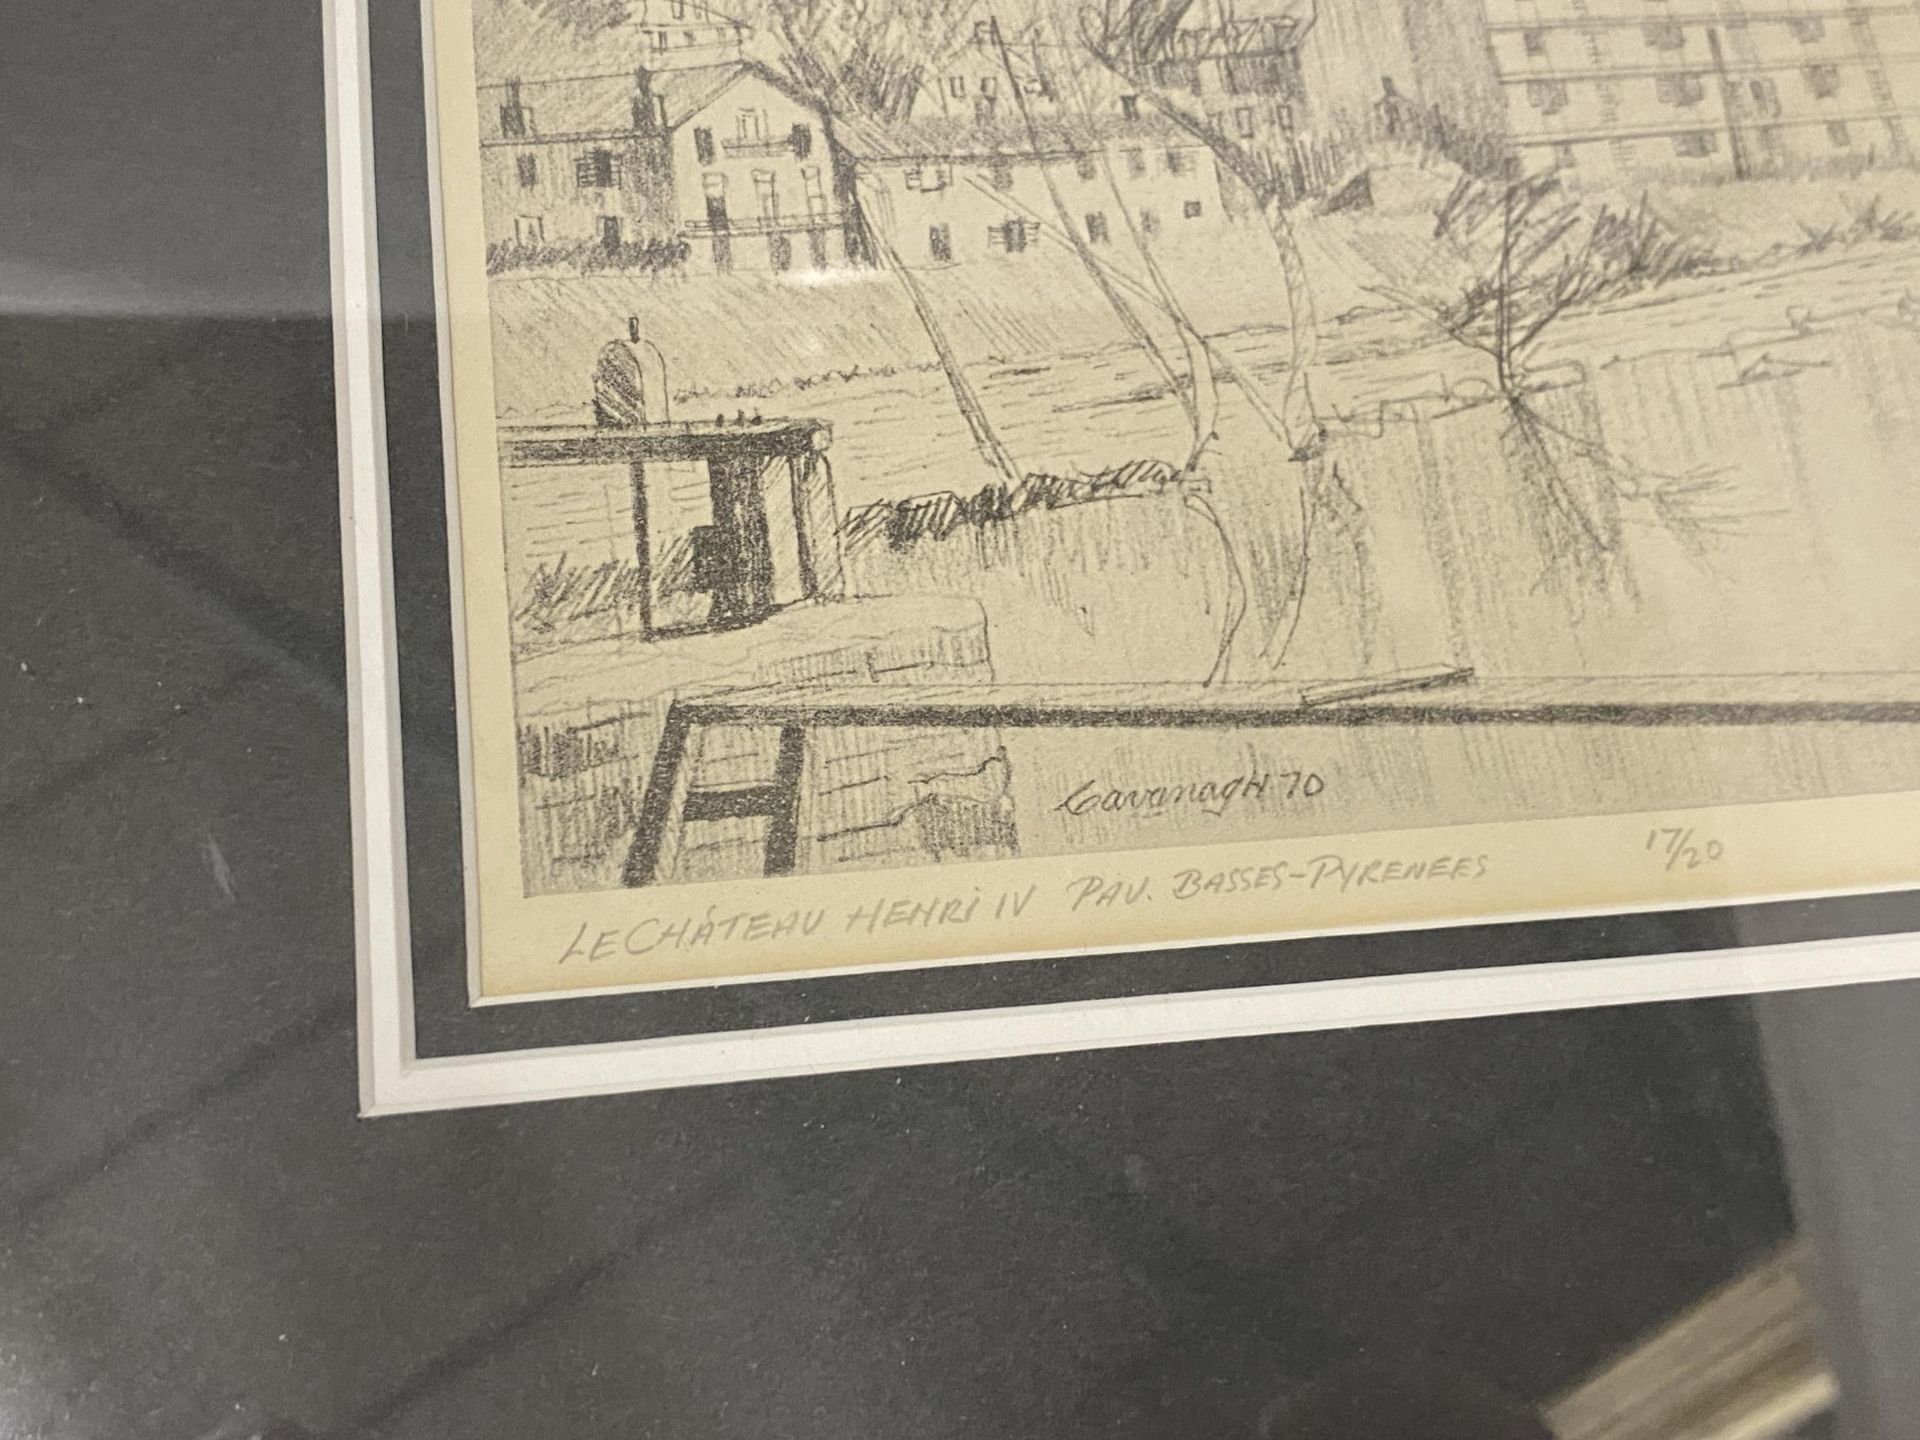 A FRAMED LIMITED EDITION LE CHATEAU HENRY IV BY PENCIL SIGNED BY CAVANAGH '70 - Image 3 of 4